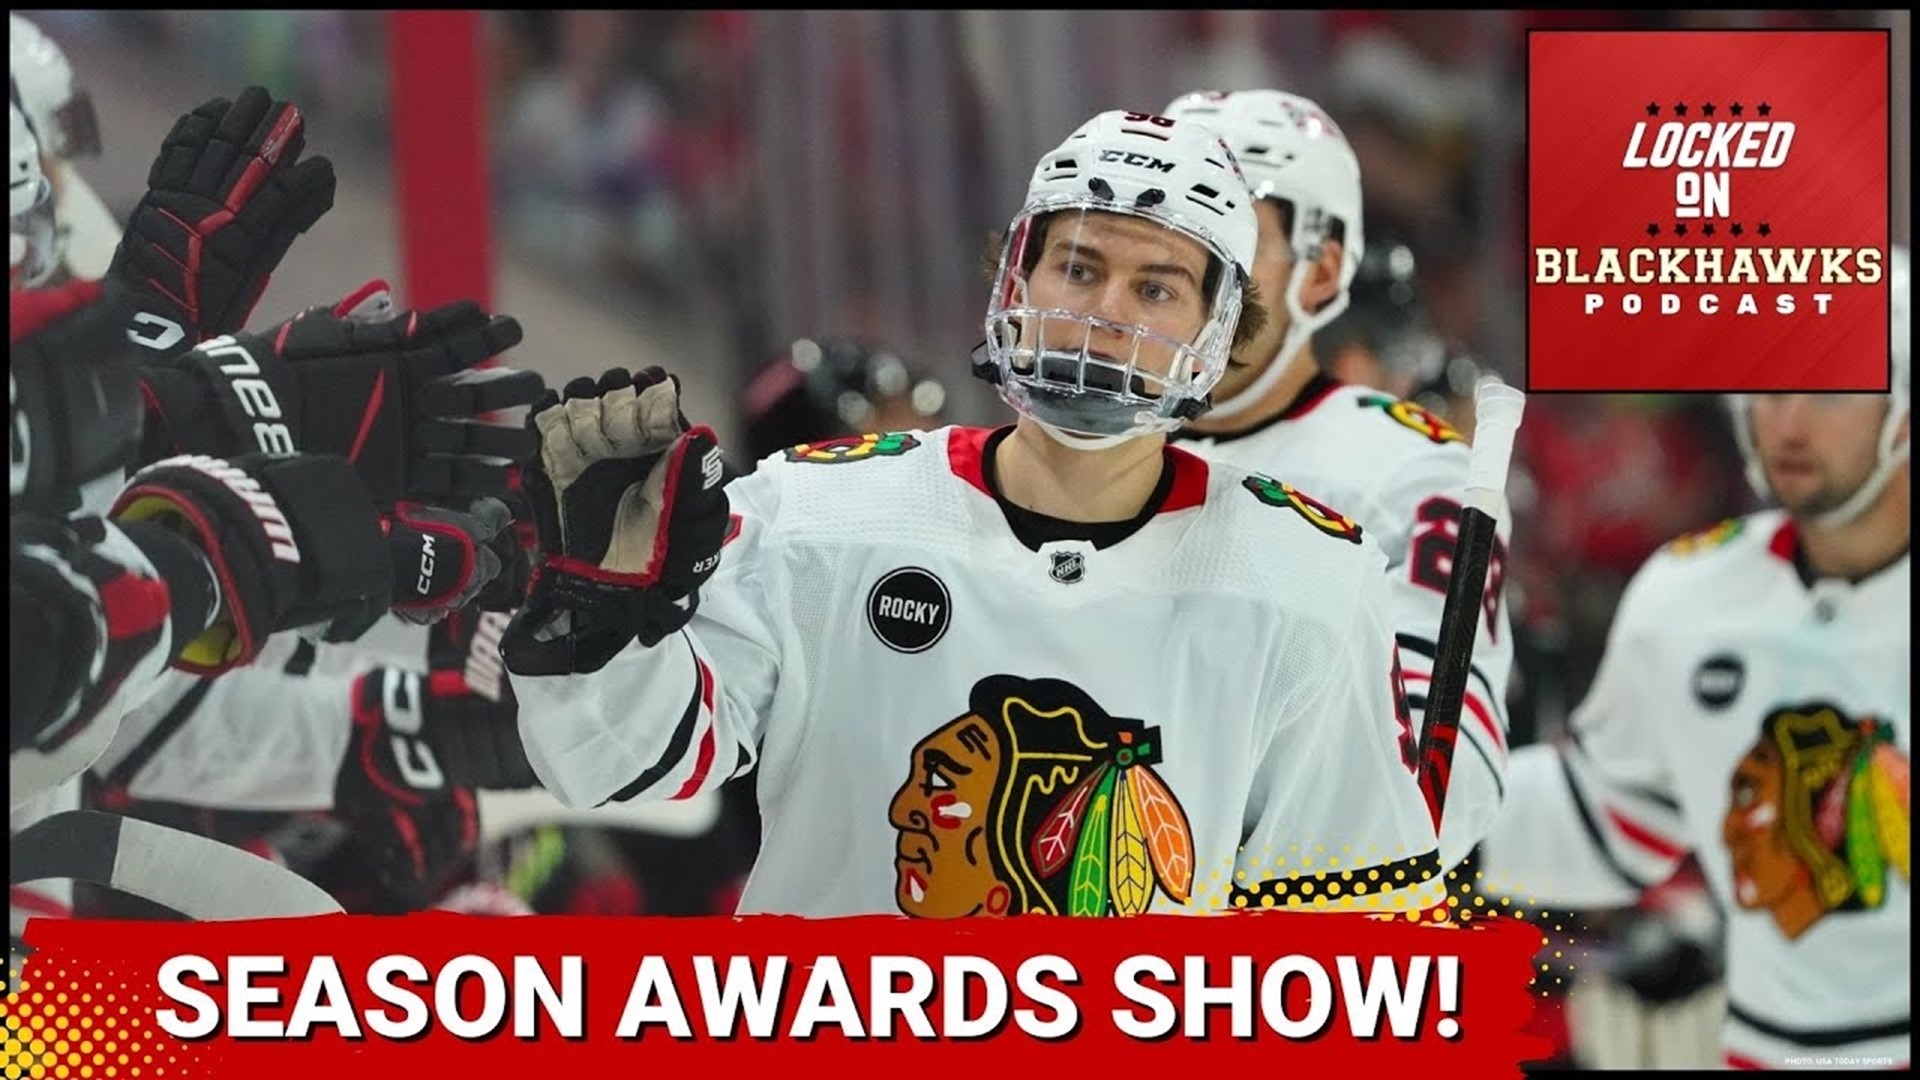 Tuesday's episode begins with a recap of the Chicago Blackhawks' exit interviews from over the weekend.